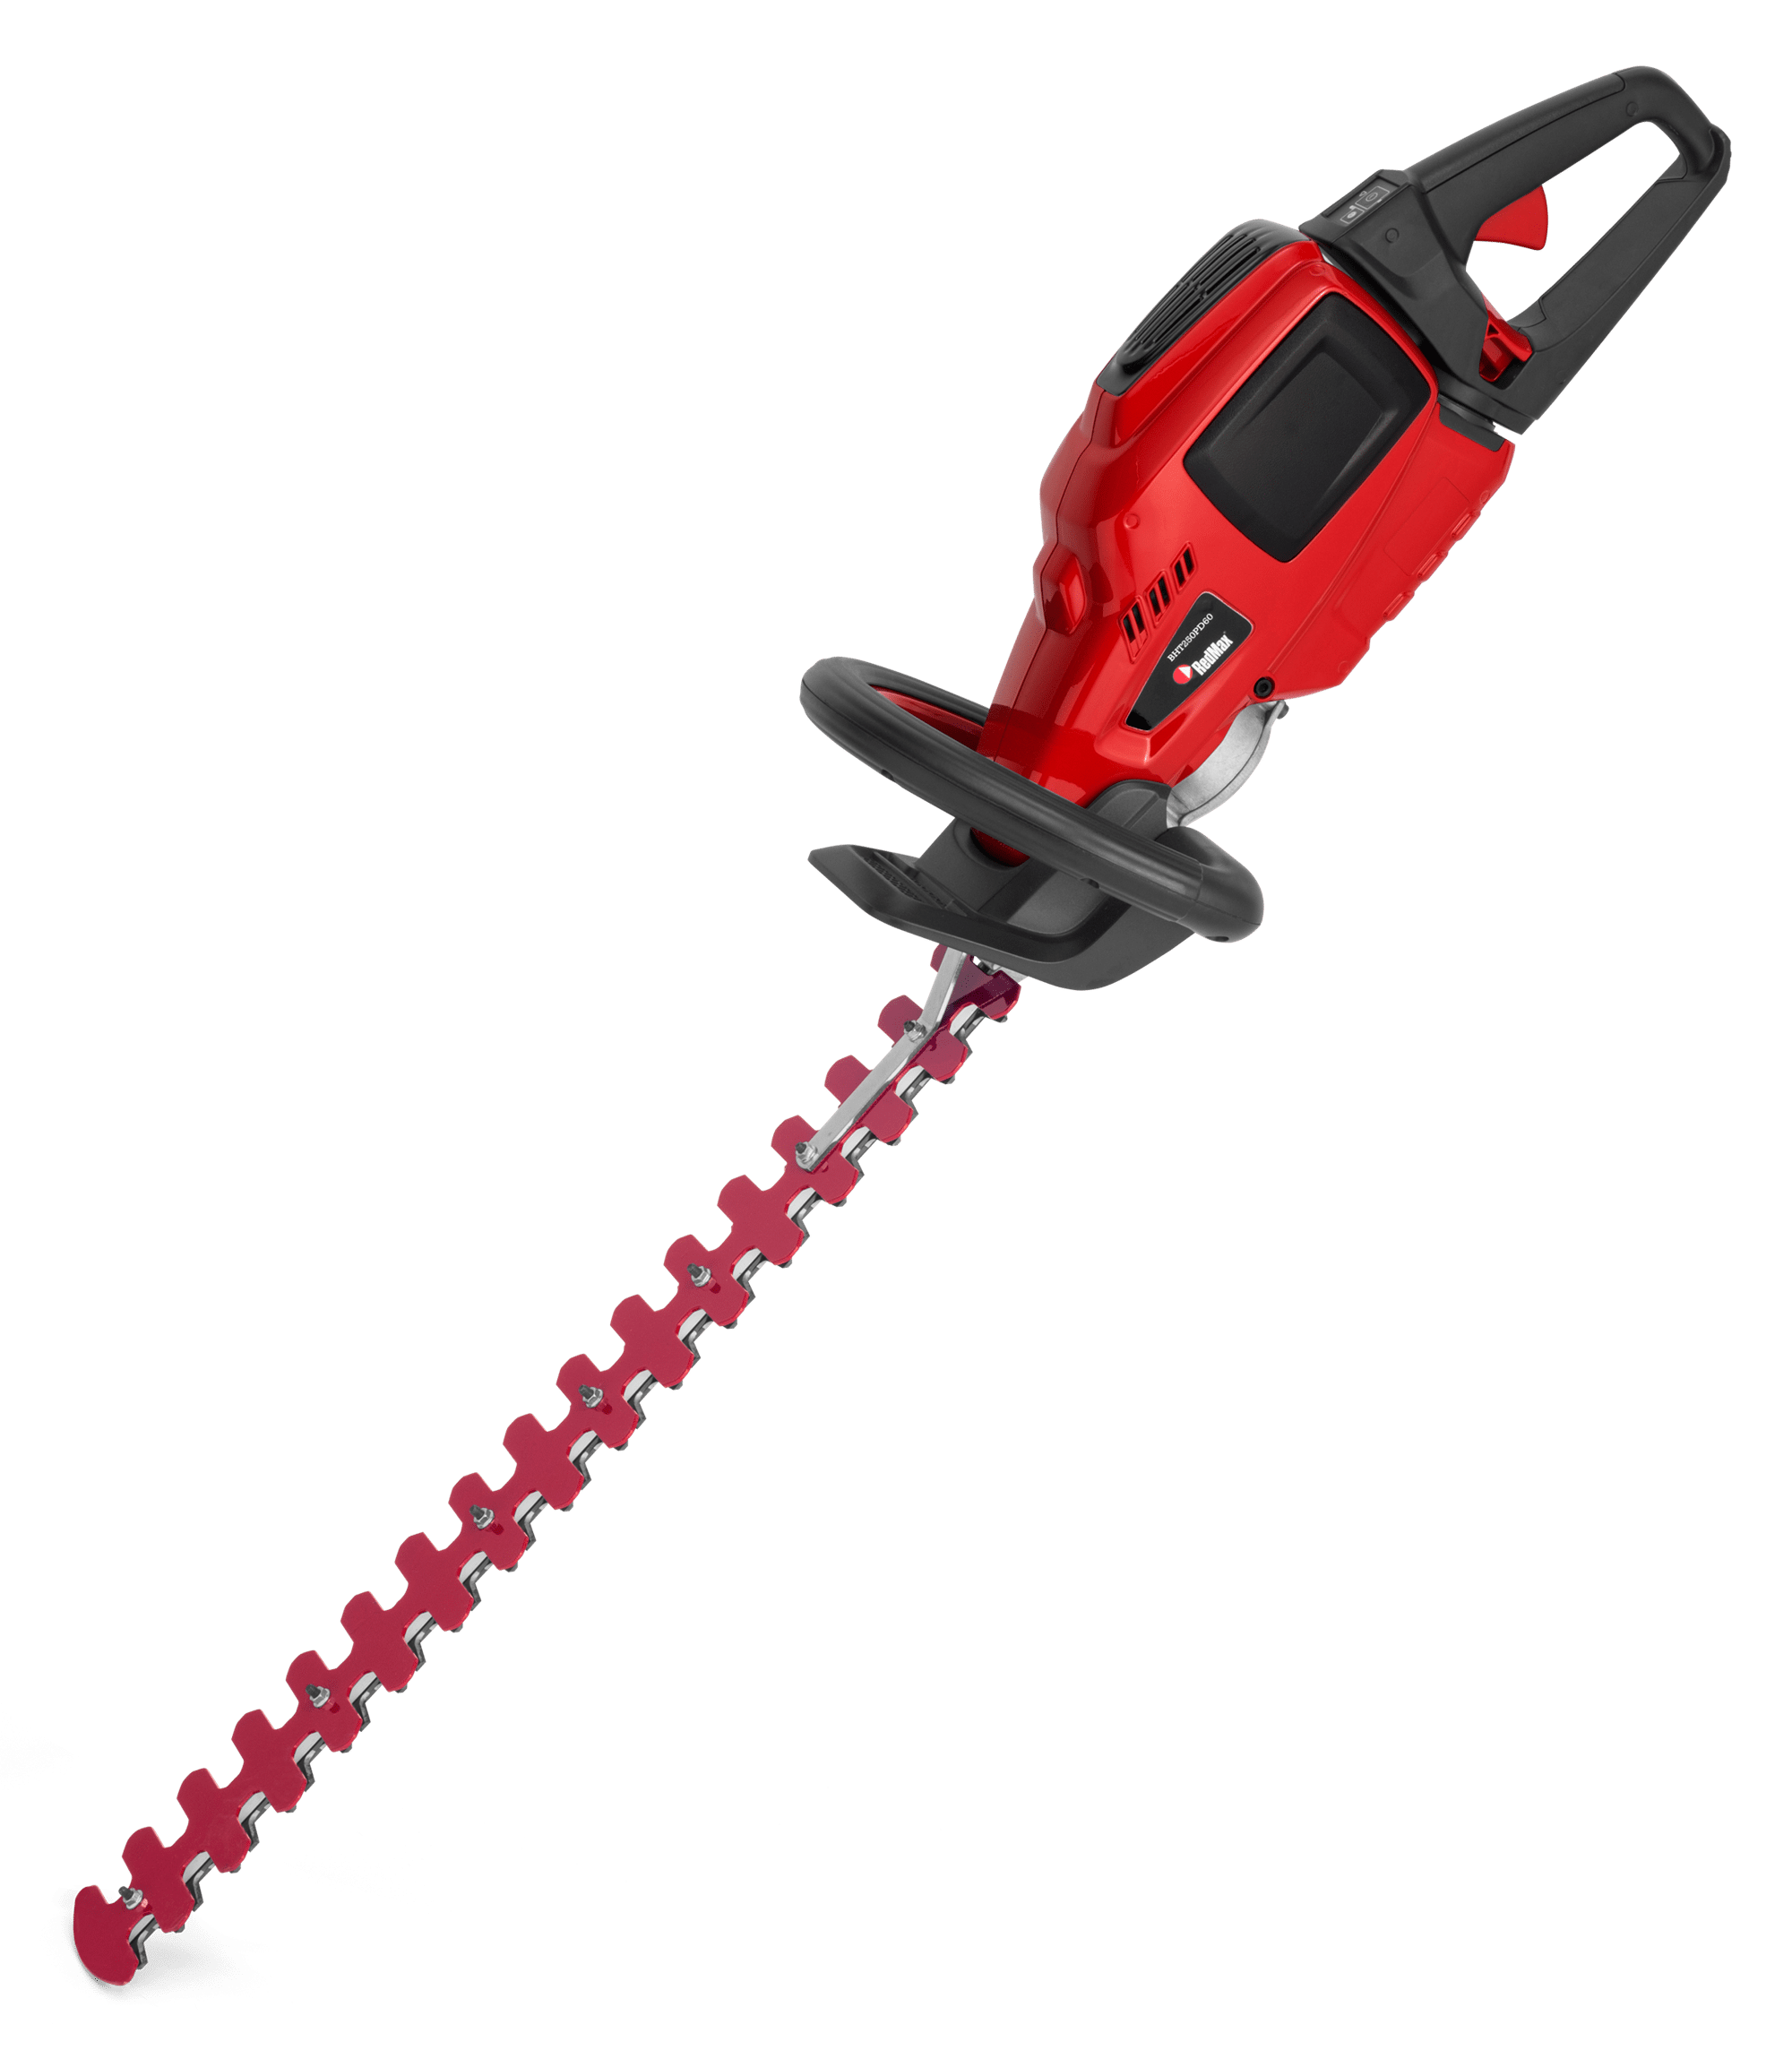 redmax hedge trimmer and pole saw combo